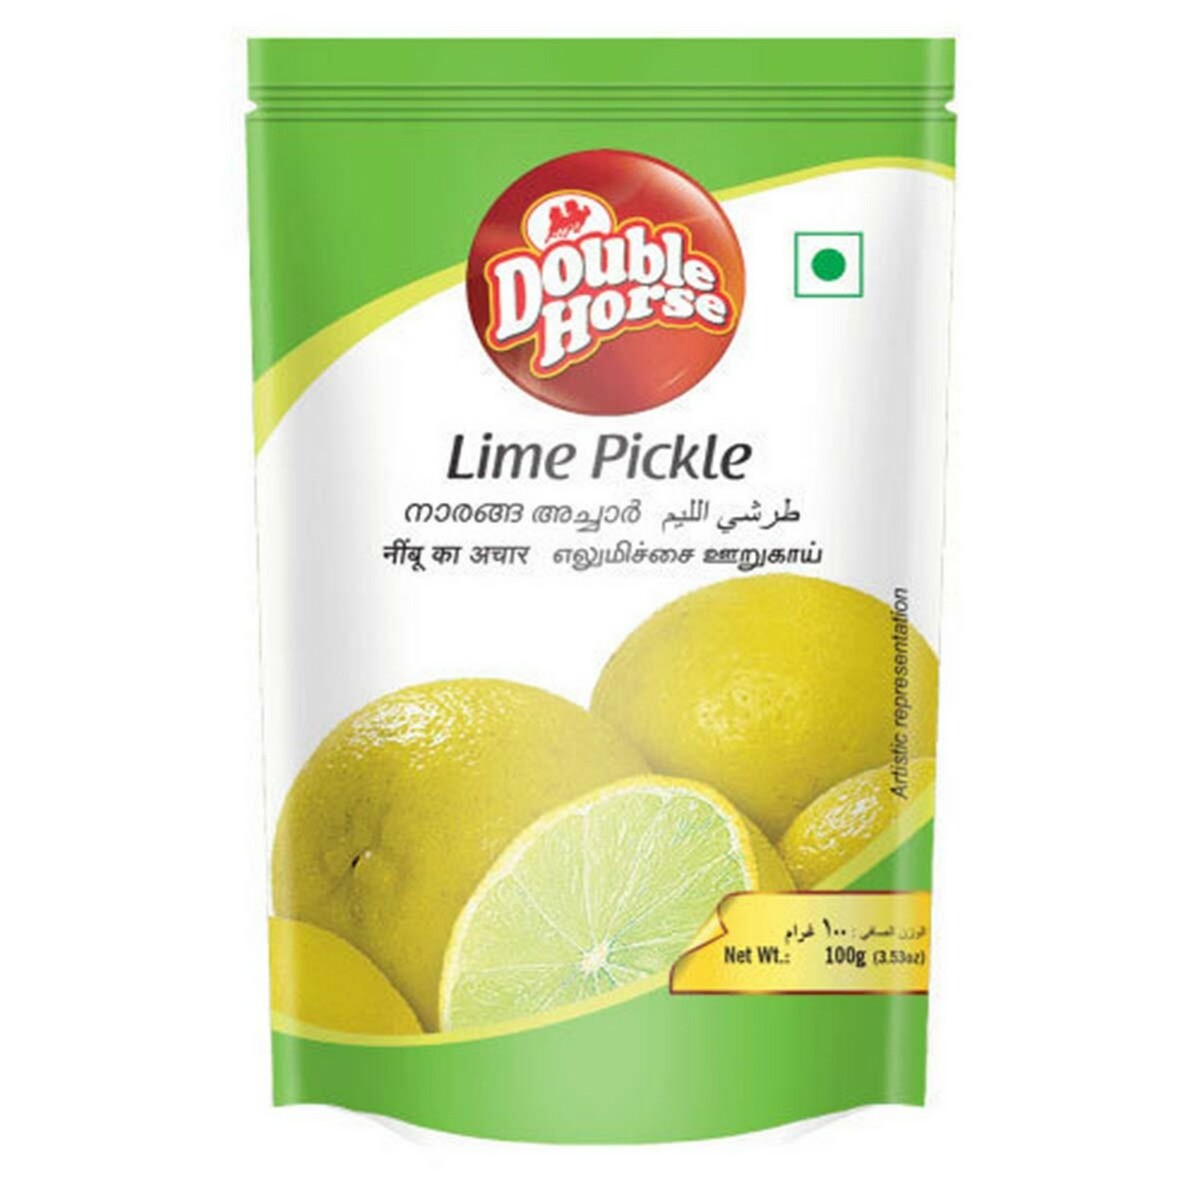 Double Horse Lime Pickle 100g